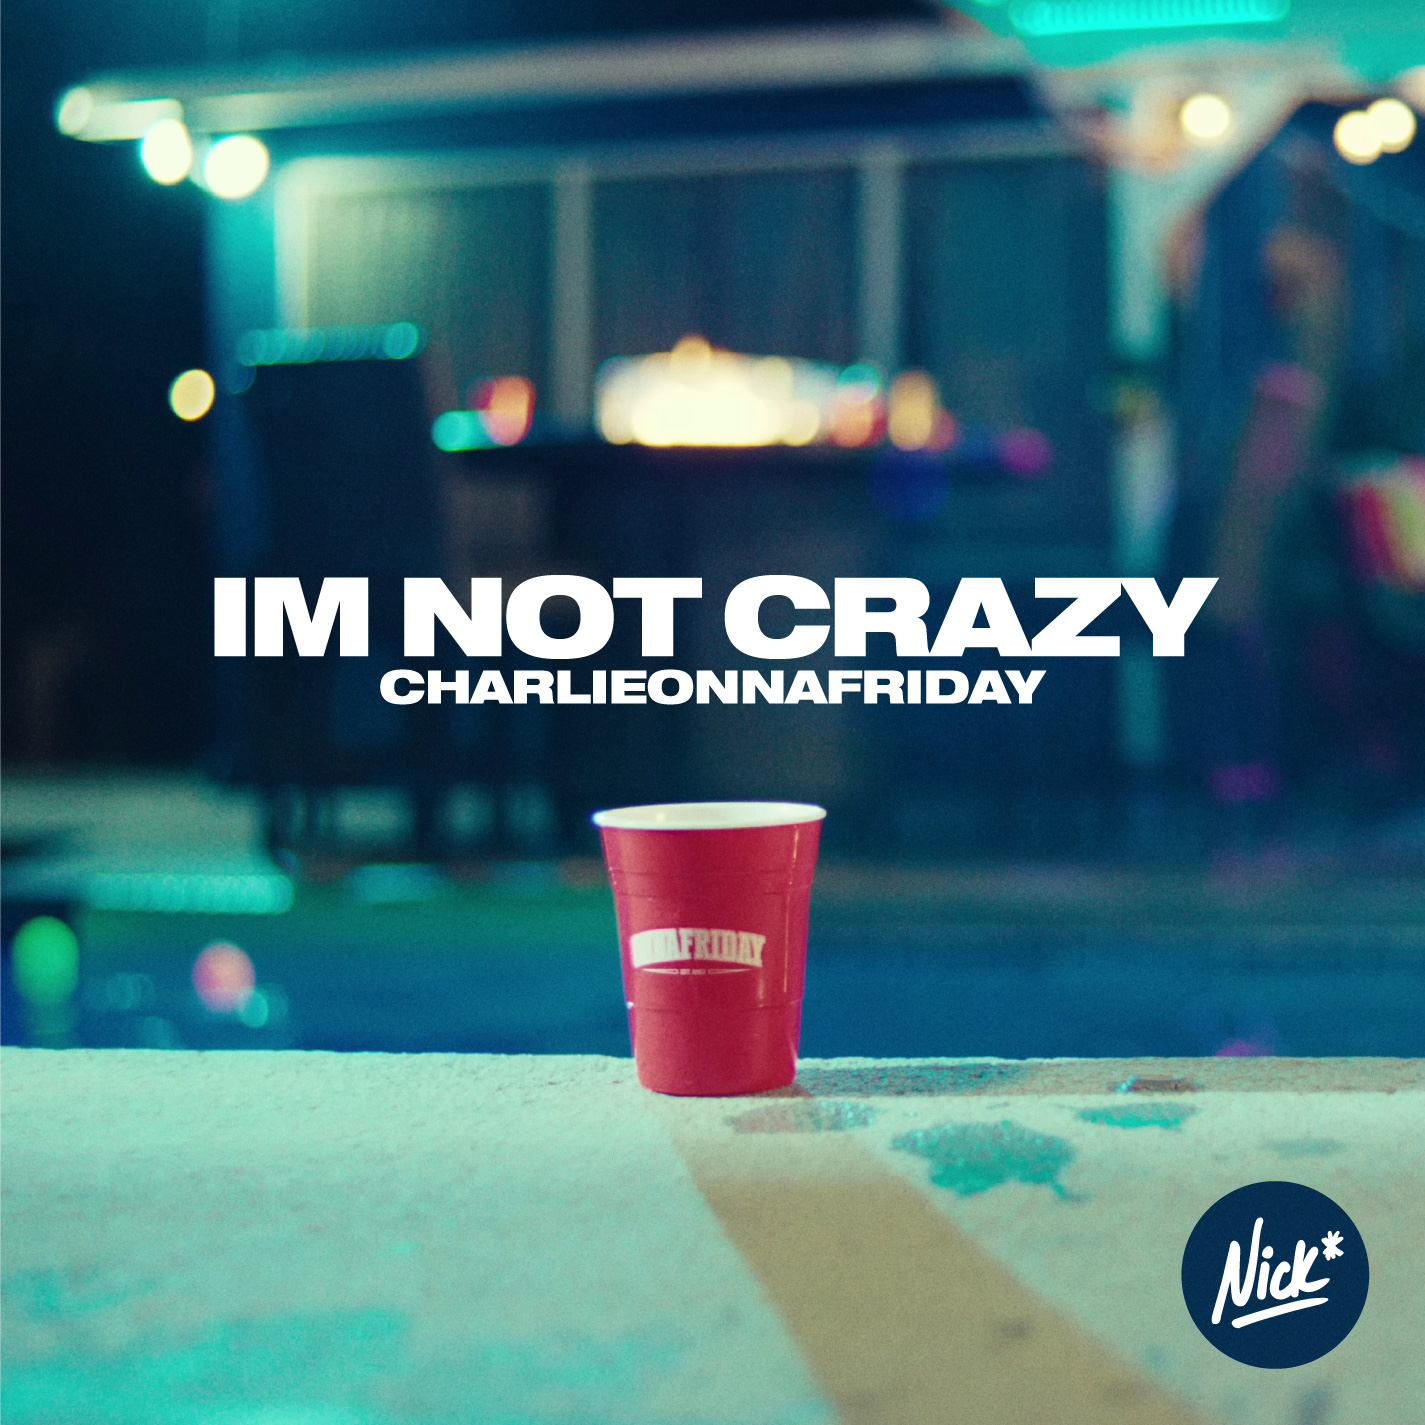 charlieonnafriday - I'm Not Crazy NIck* After Hours Remix